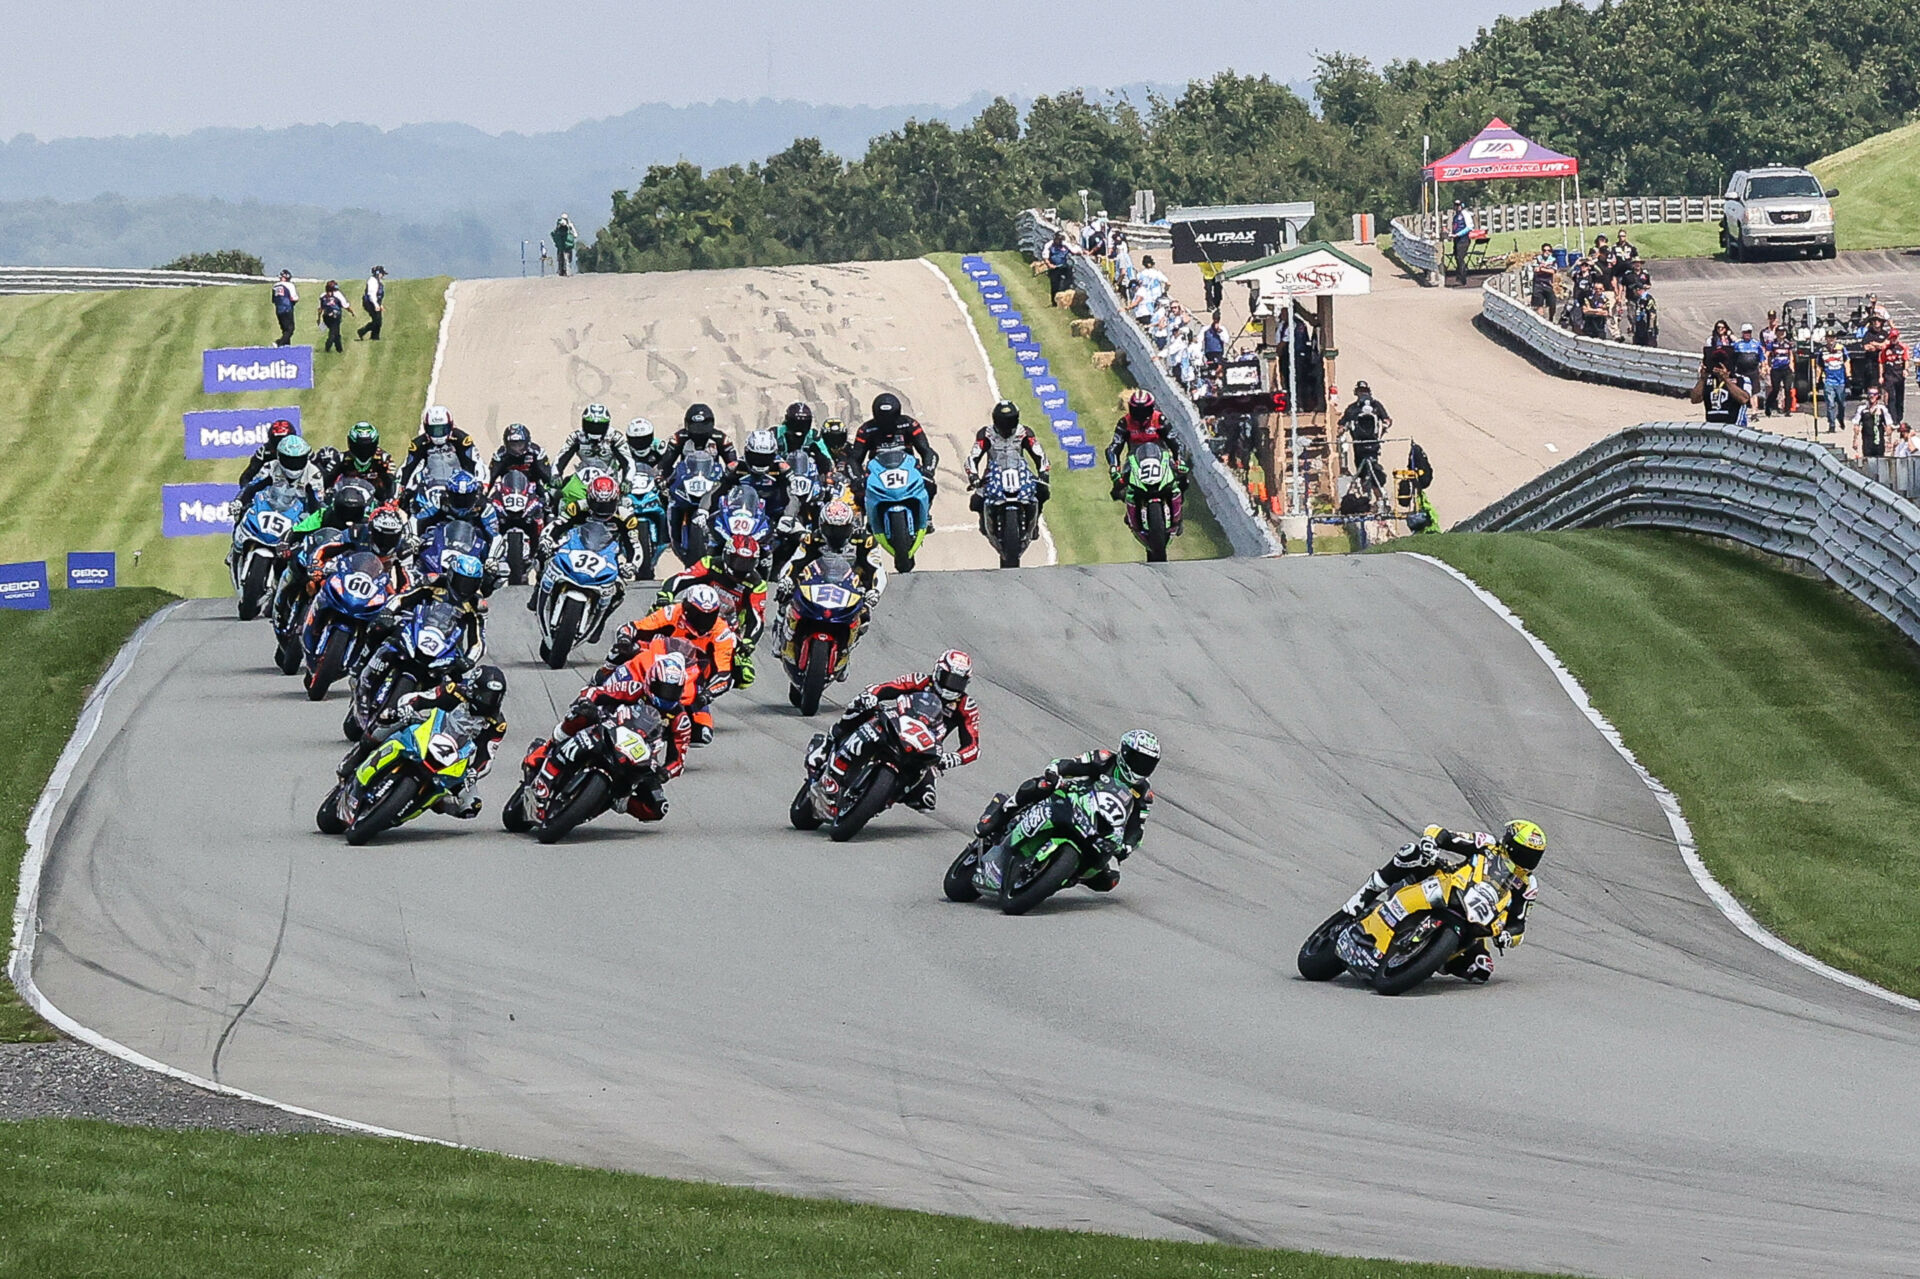 Xavi Fores (12) leading a Supersport race at PittRace. Photo by Brian J. Nelson, courtesy Ducati.